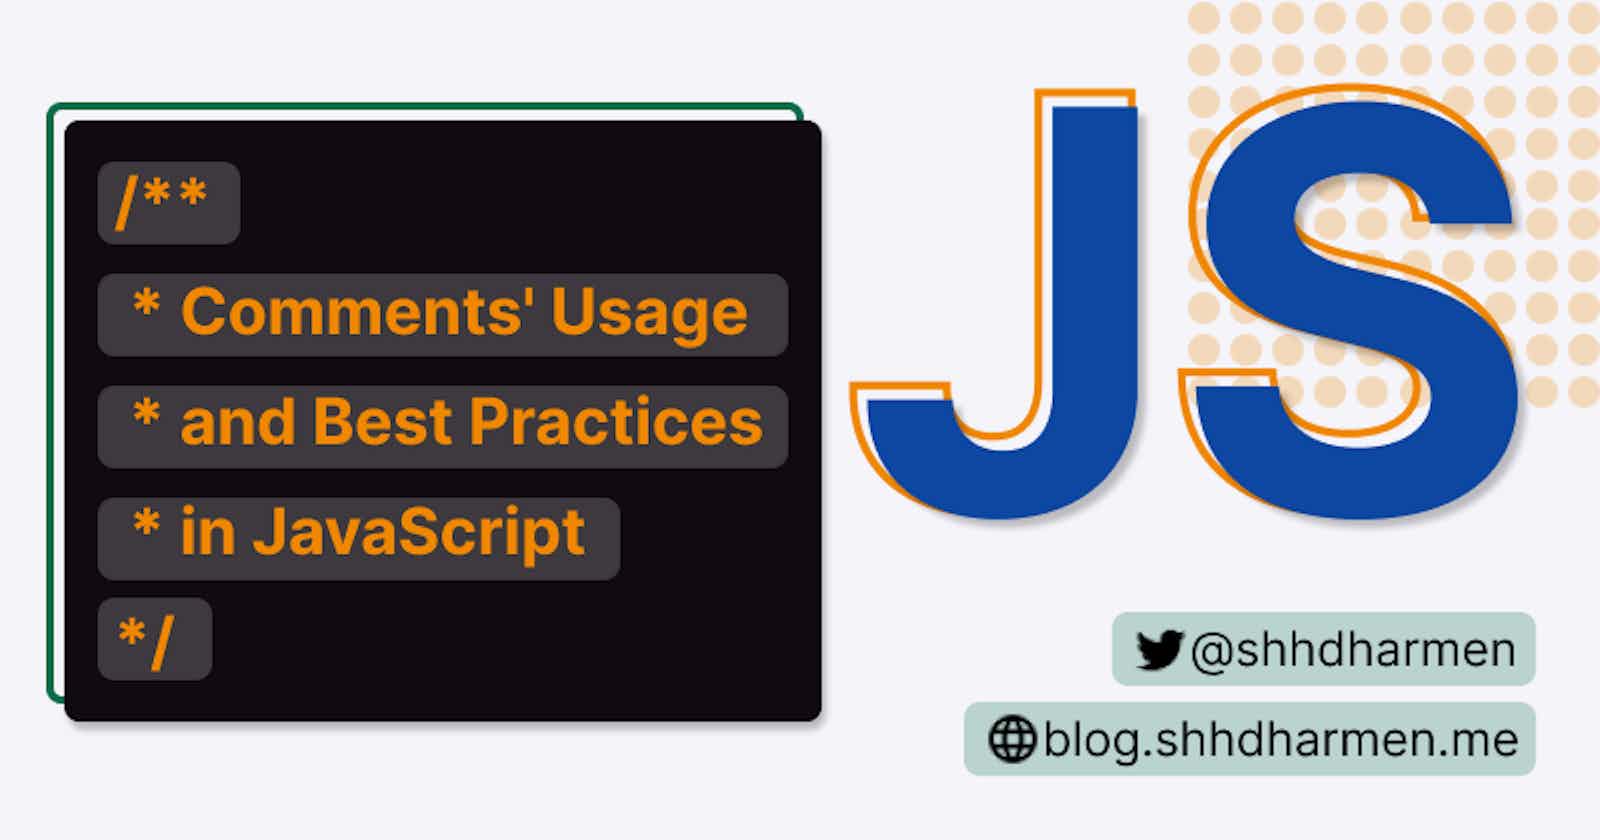 Comments' Usage and Best Practices in JavaScript